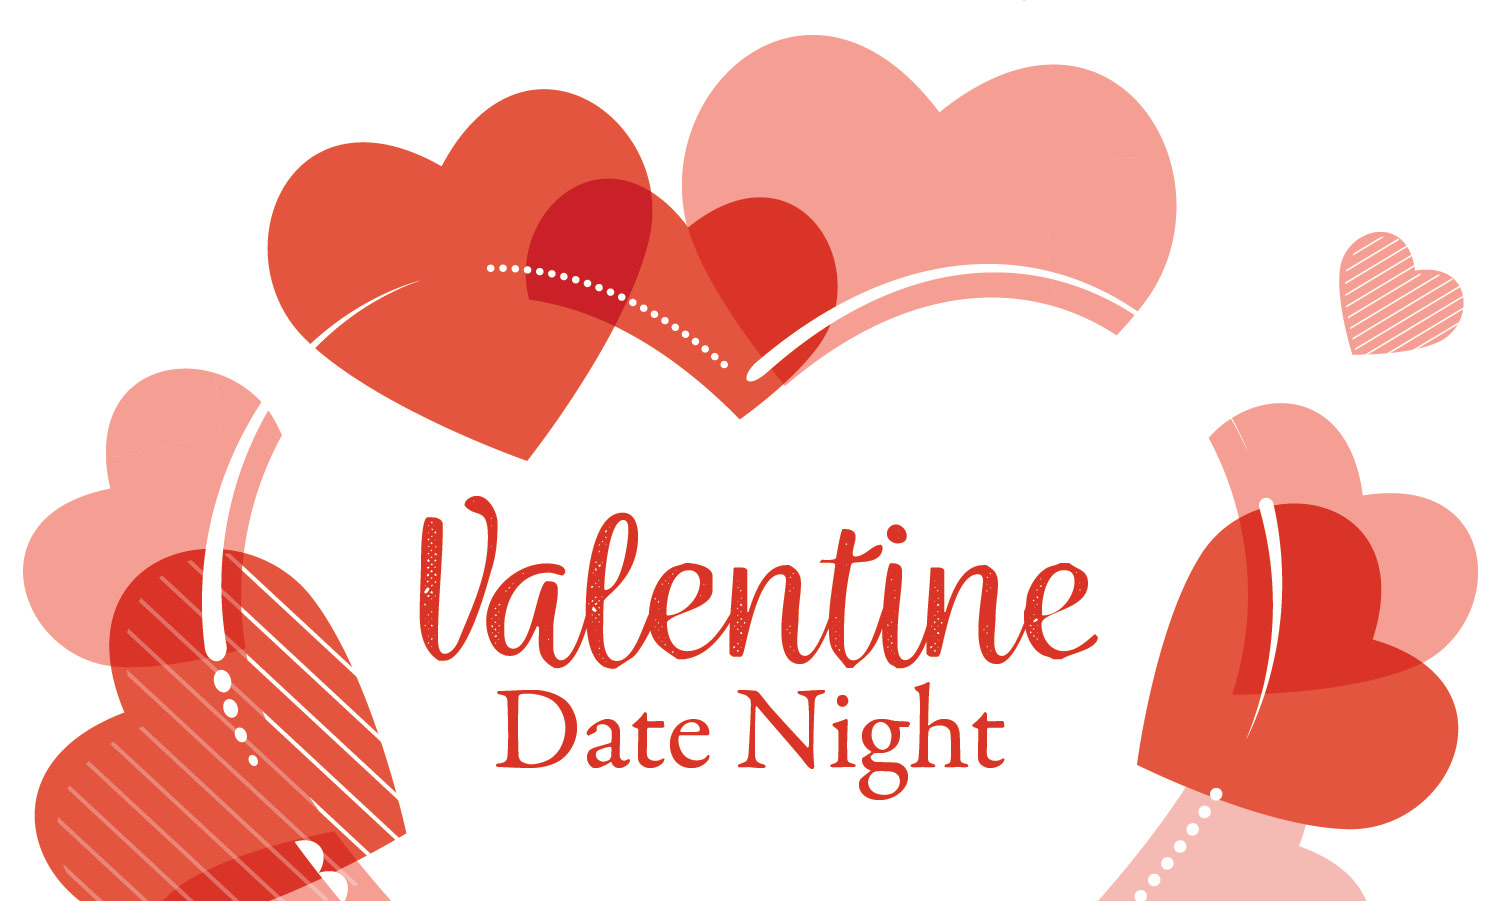 Illustration of pink and red hearts. Text says Valentine Date Night.